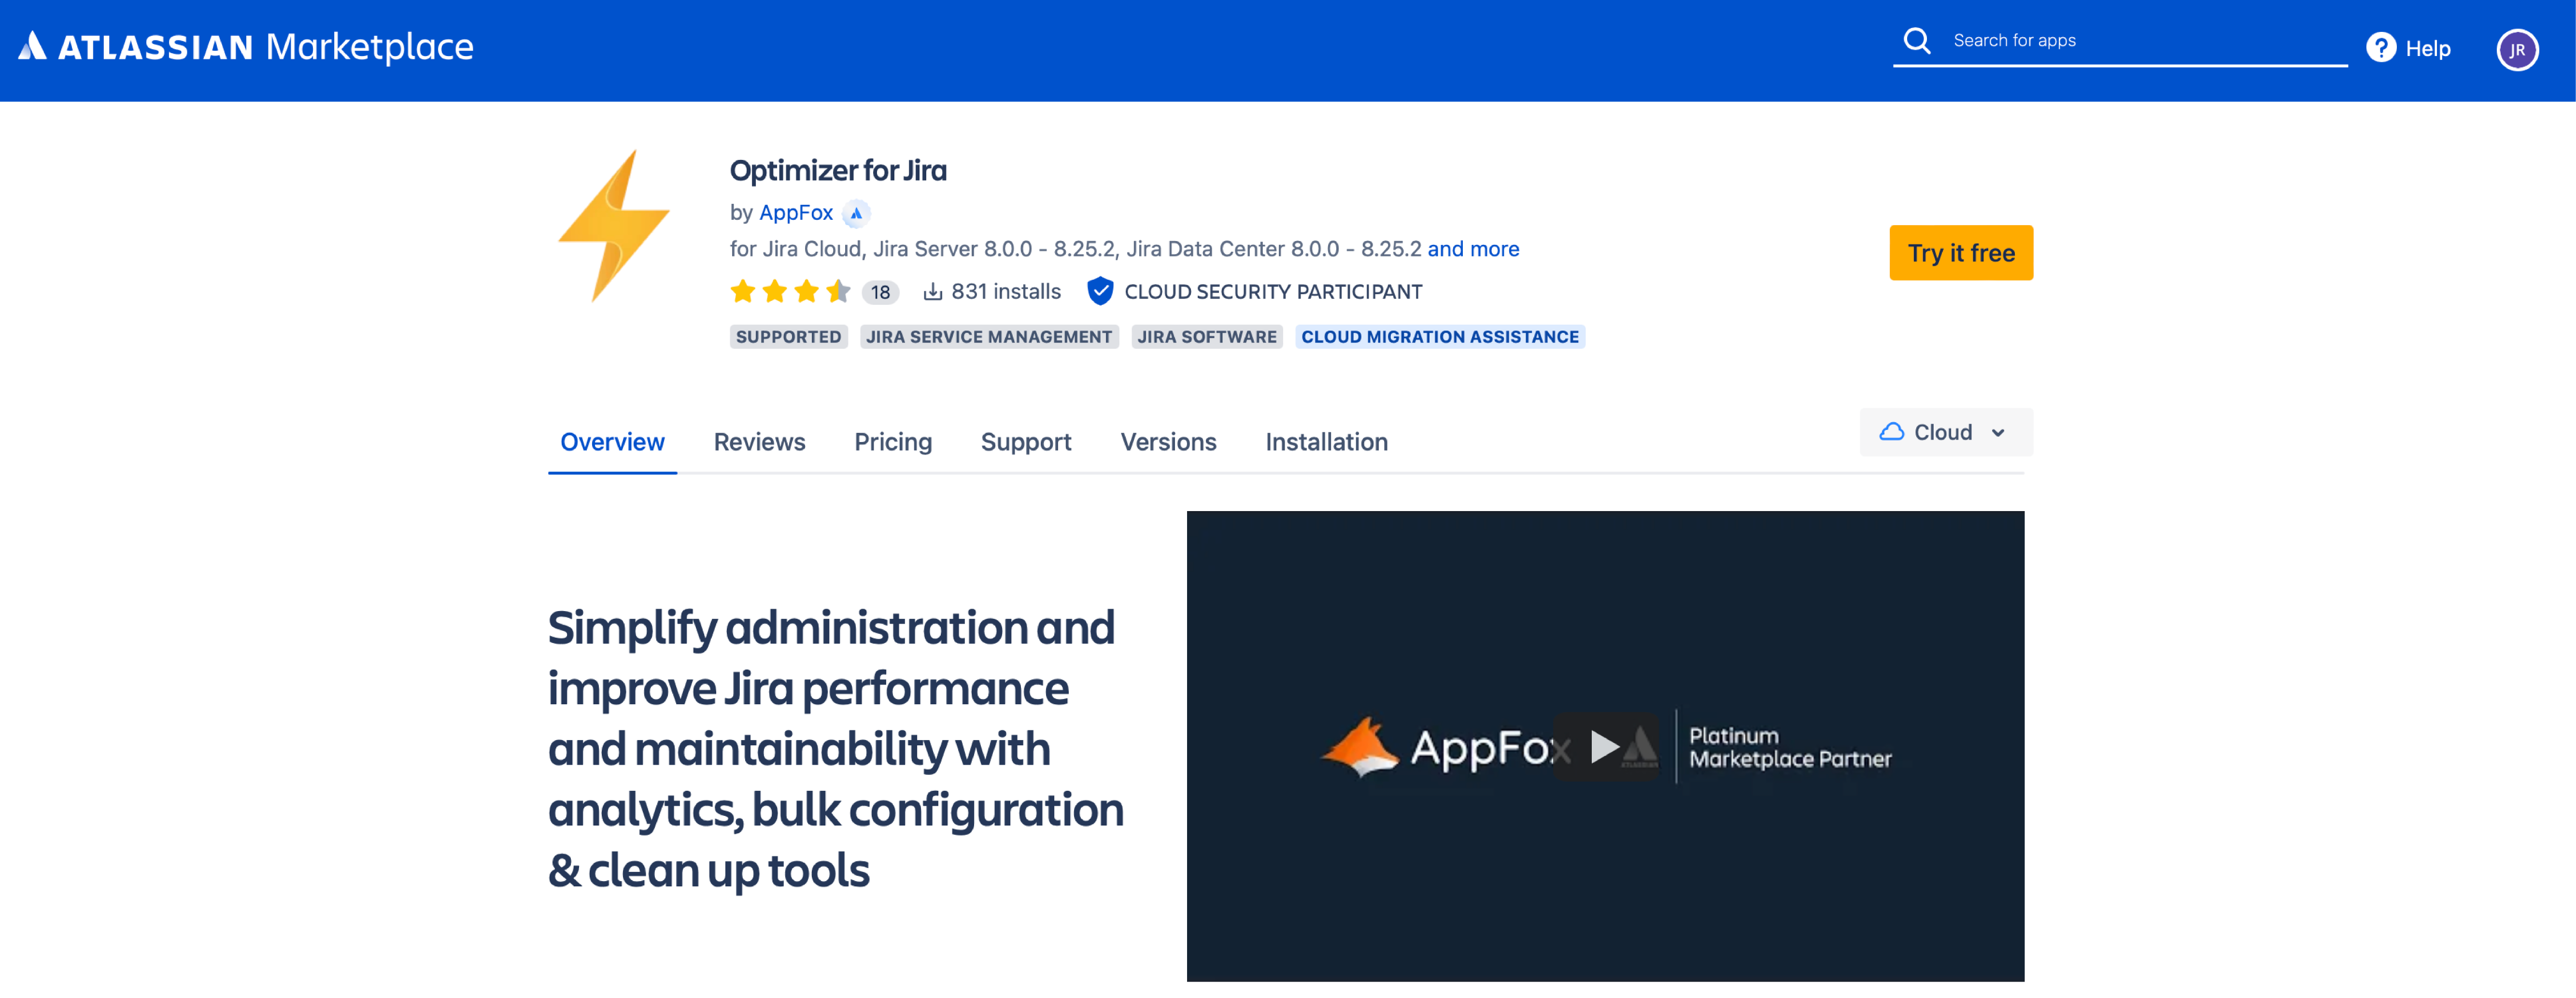 Optimizer for Jira product listing on the Atlassian Marketplace